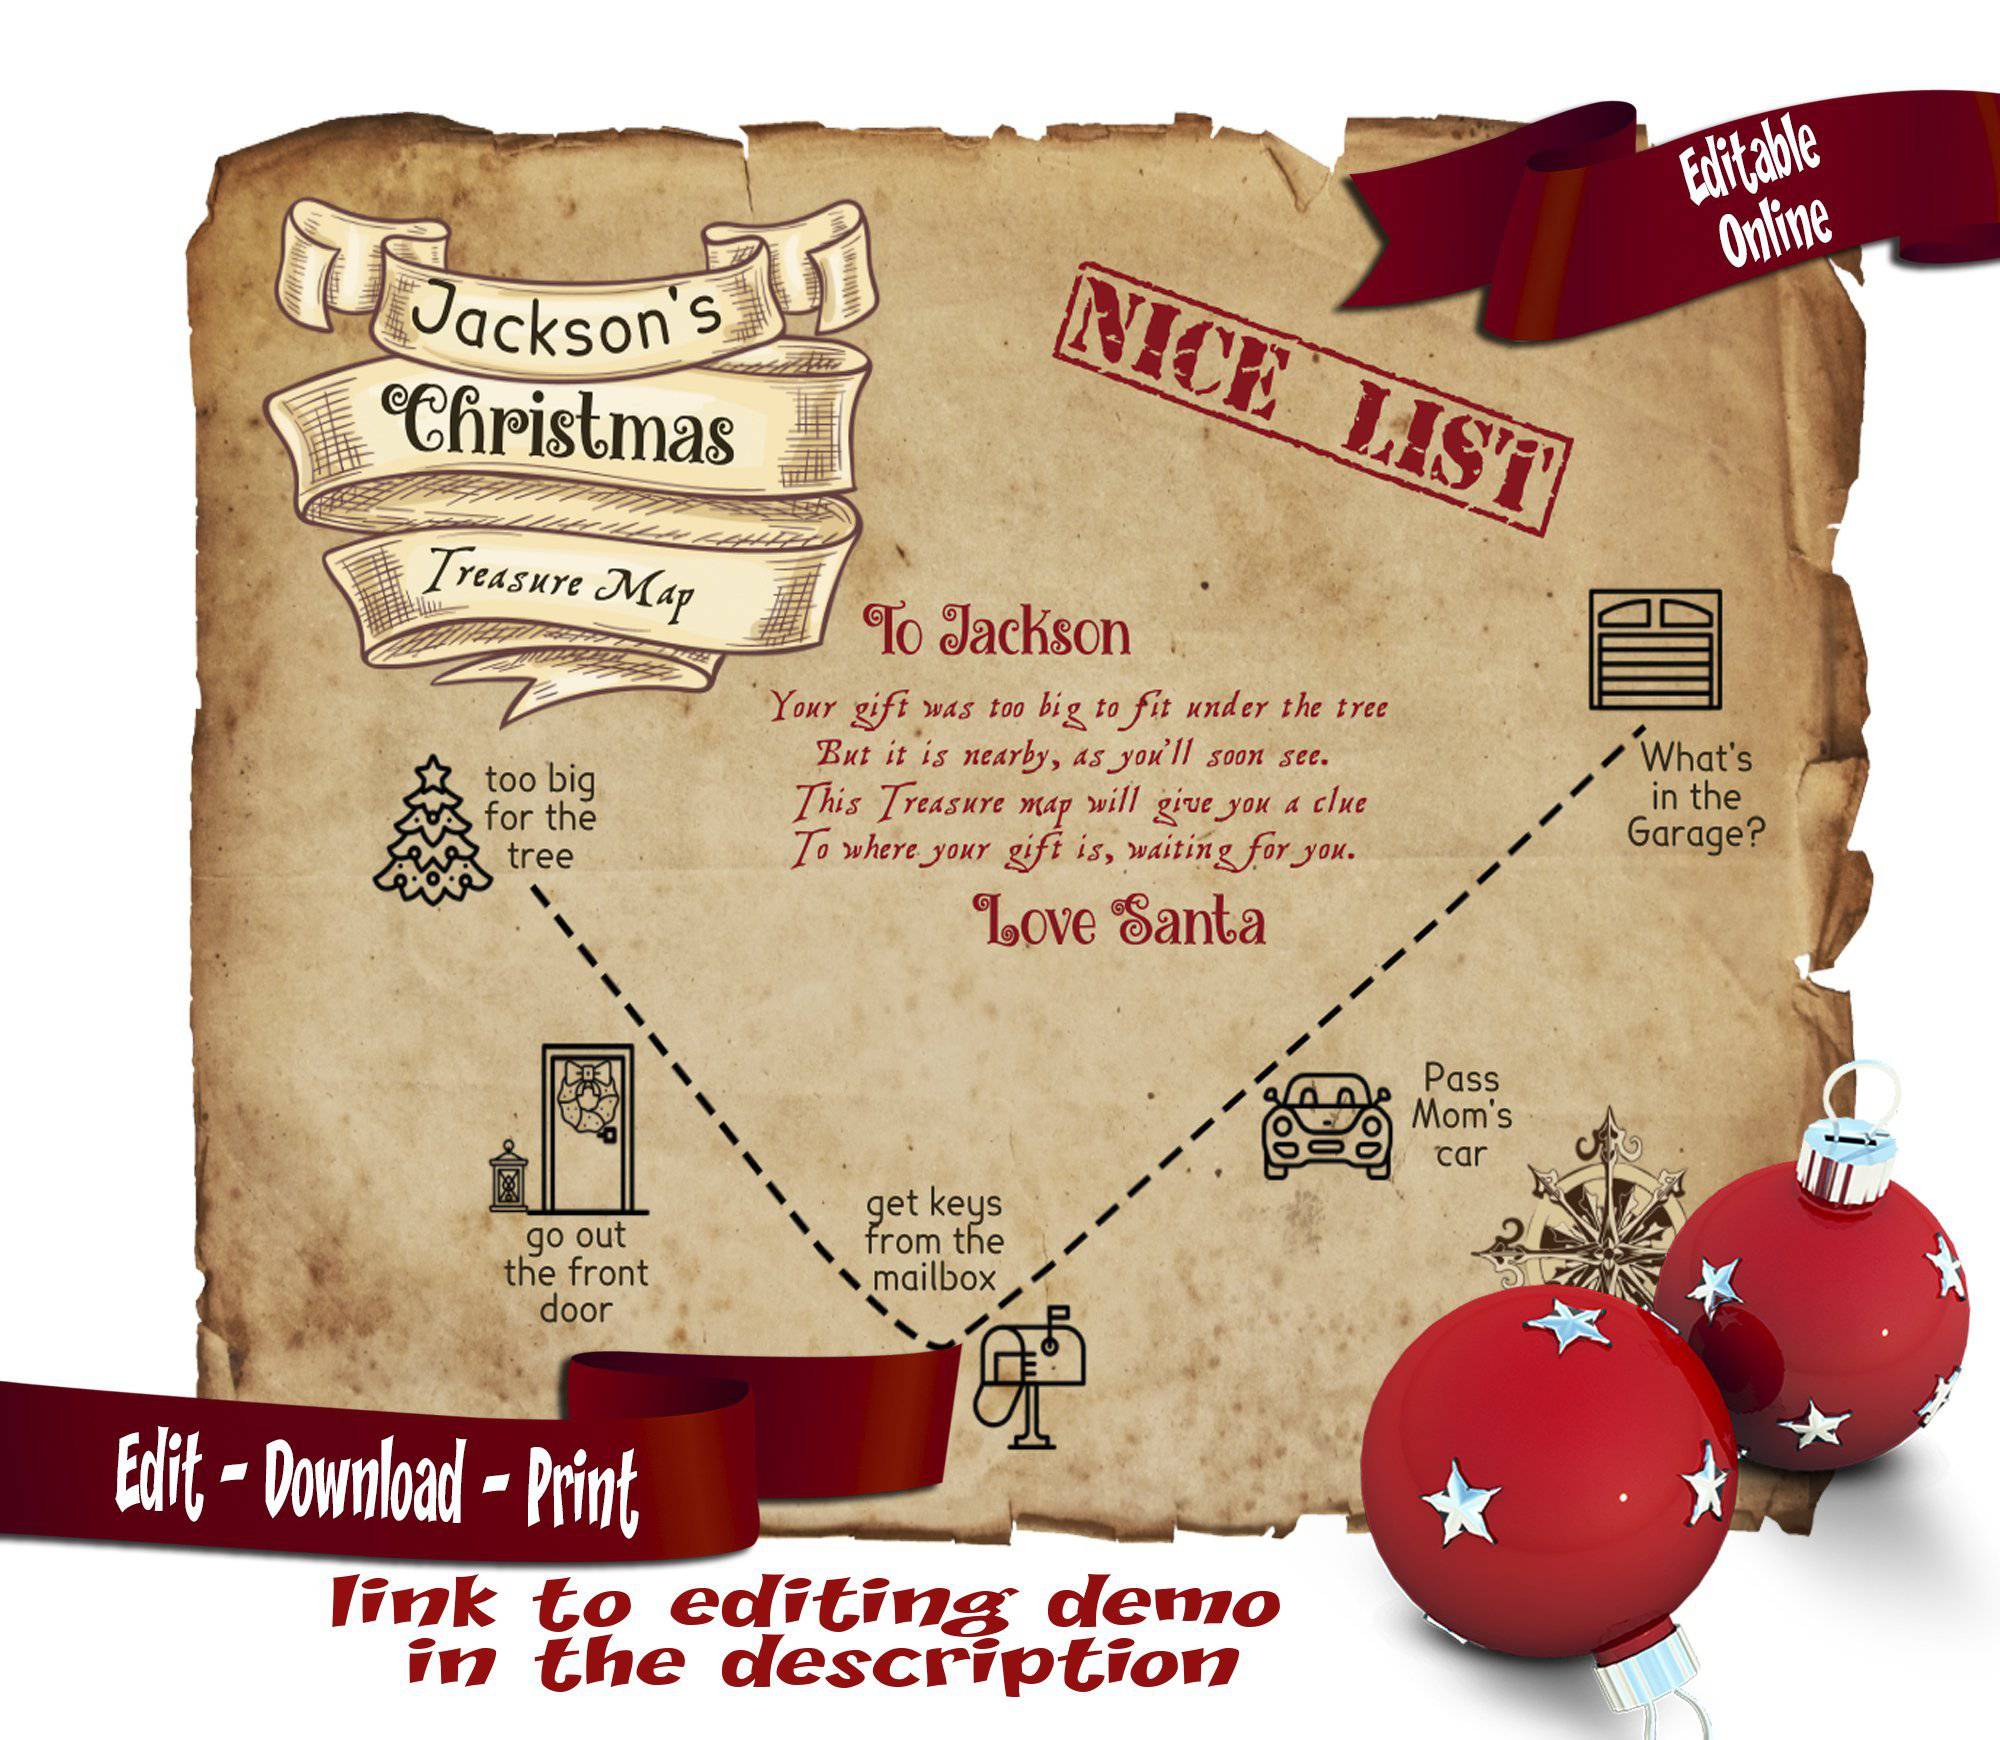 Santa Claus Christmas Treasure Map; solutions for Large Presents and no xmas tree - Open Chests